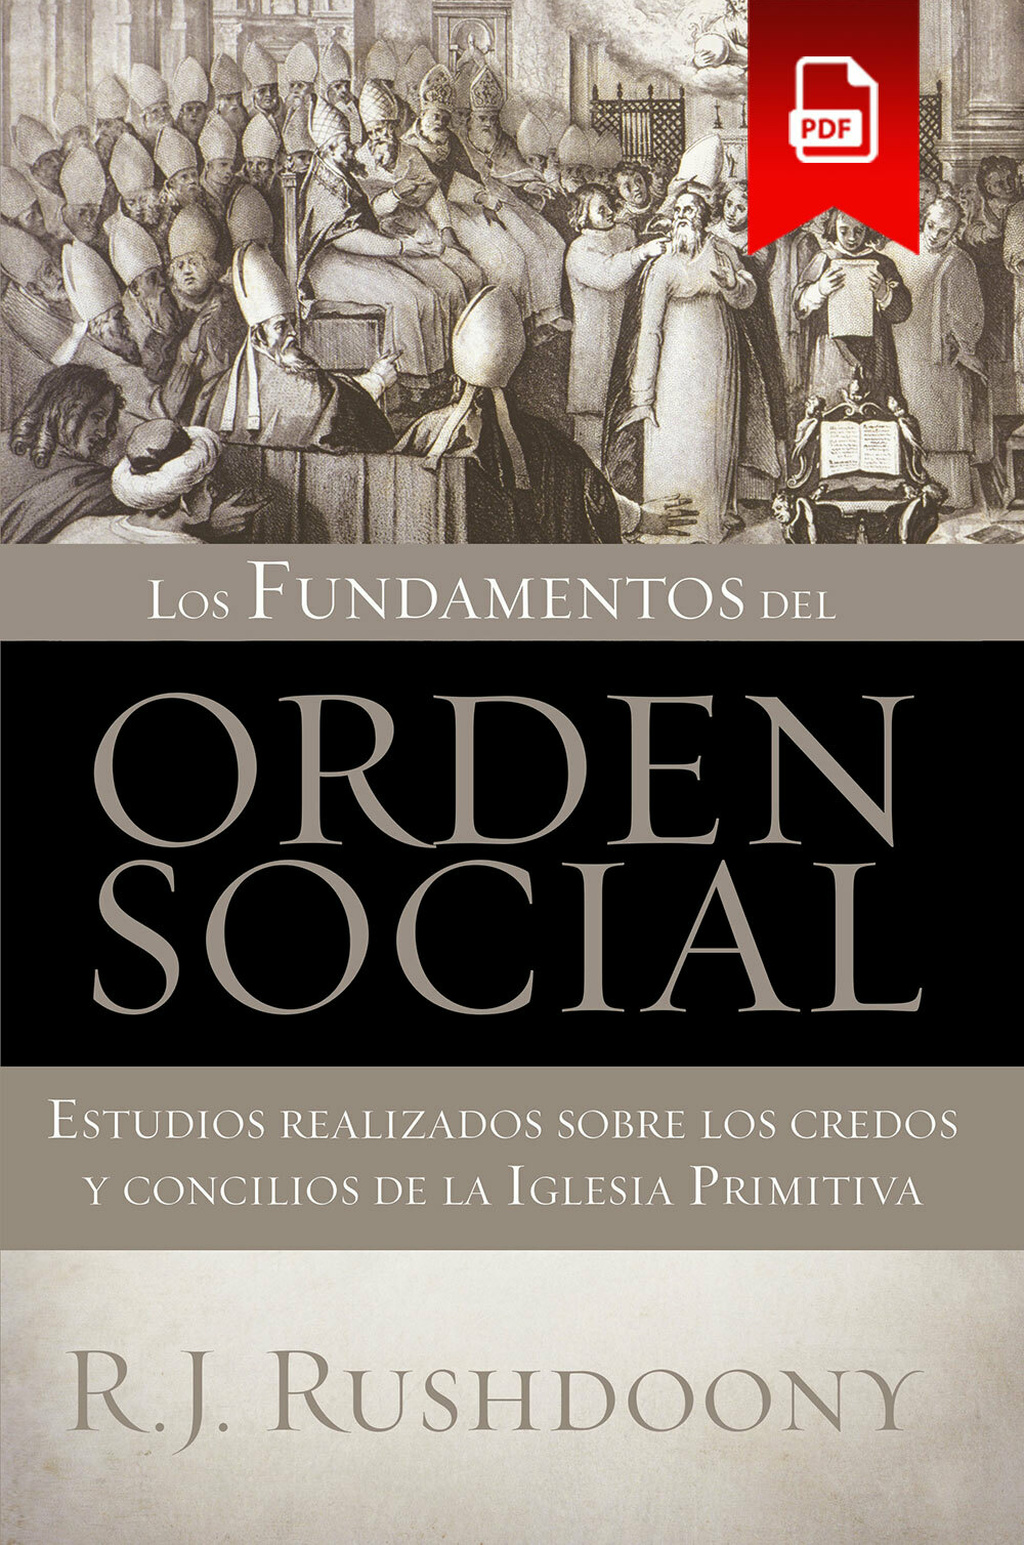 Foundations Cover 2 Spanish